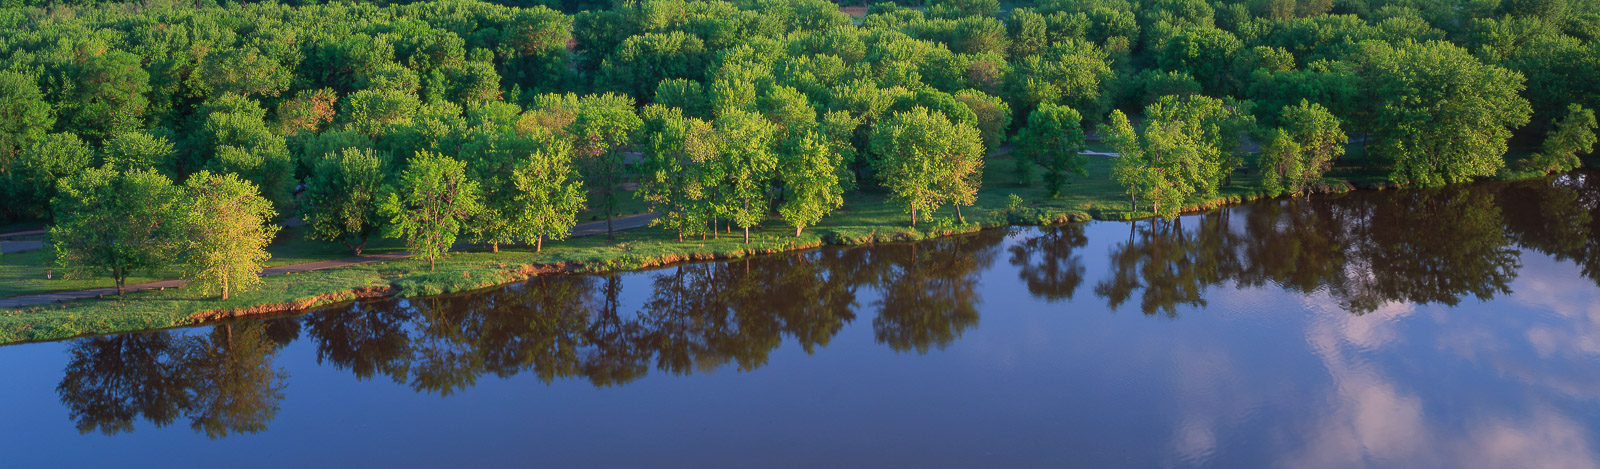 Spring foilage along the St. Croix River National Scenic Riverway, Minnesota/Wisconosin